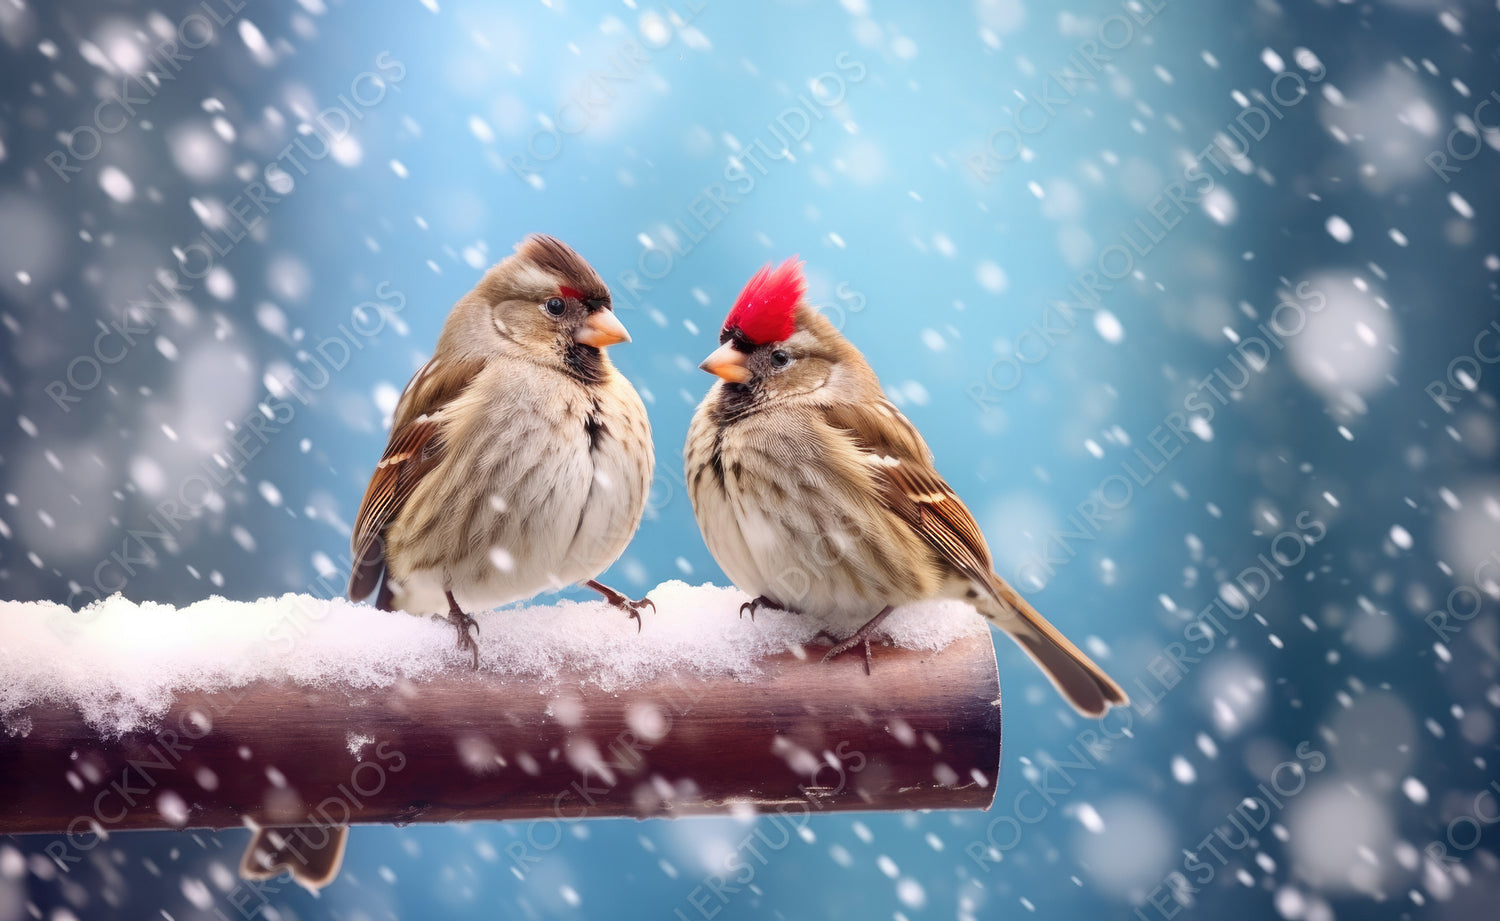 Cute funny merry Christmas sparrows in the New Year with a red cap during a snowfall. Merry Christmas and Happy New Year.